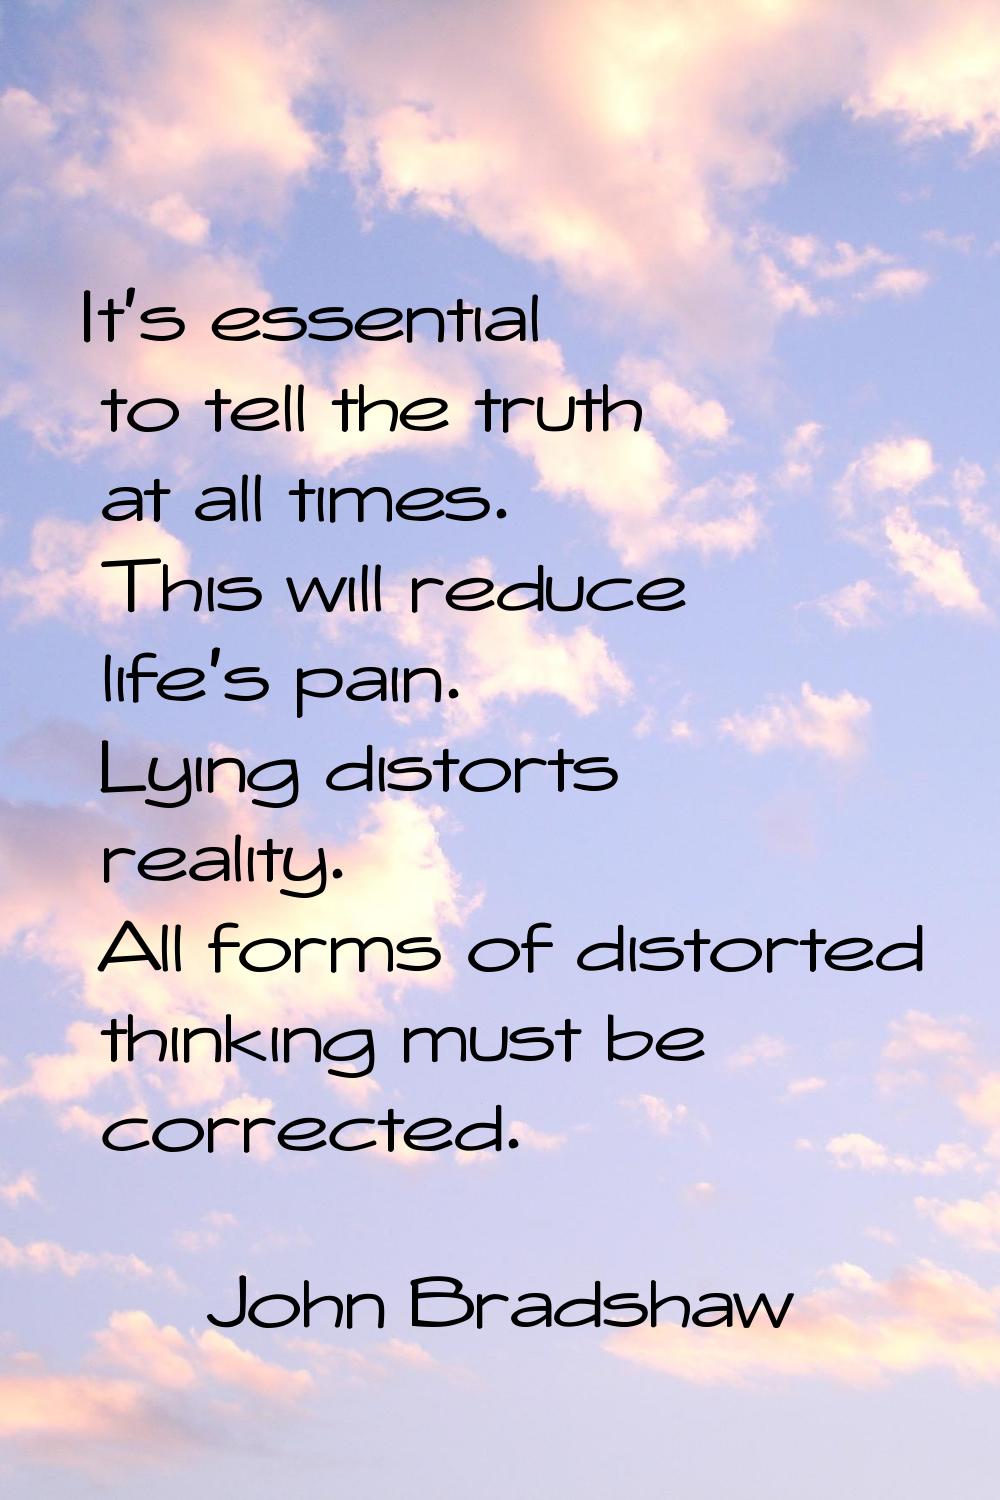 It's essential to tell the truth at all times. This will reduce life's pain. Lying distorts reality